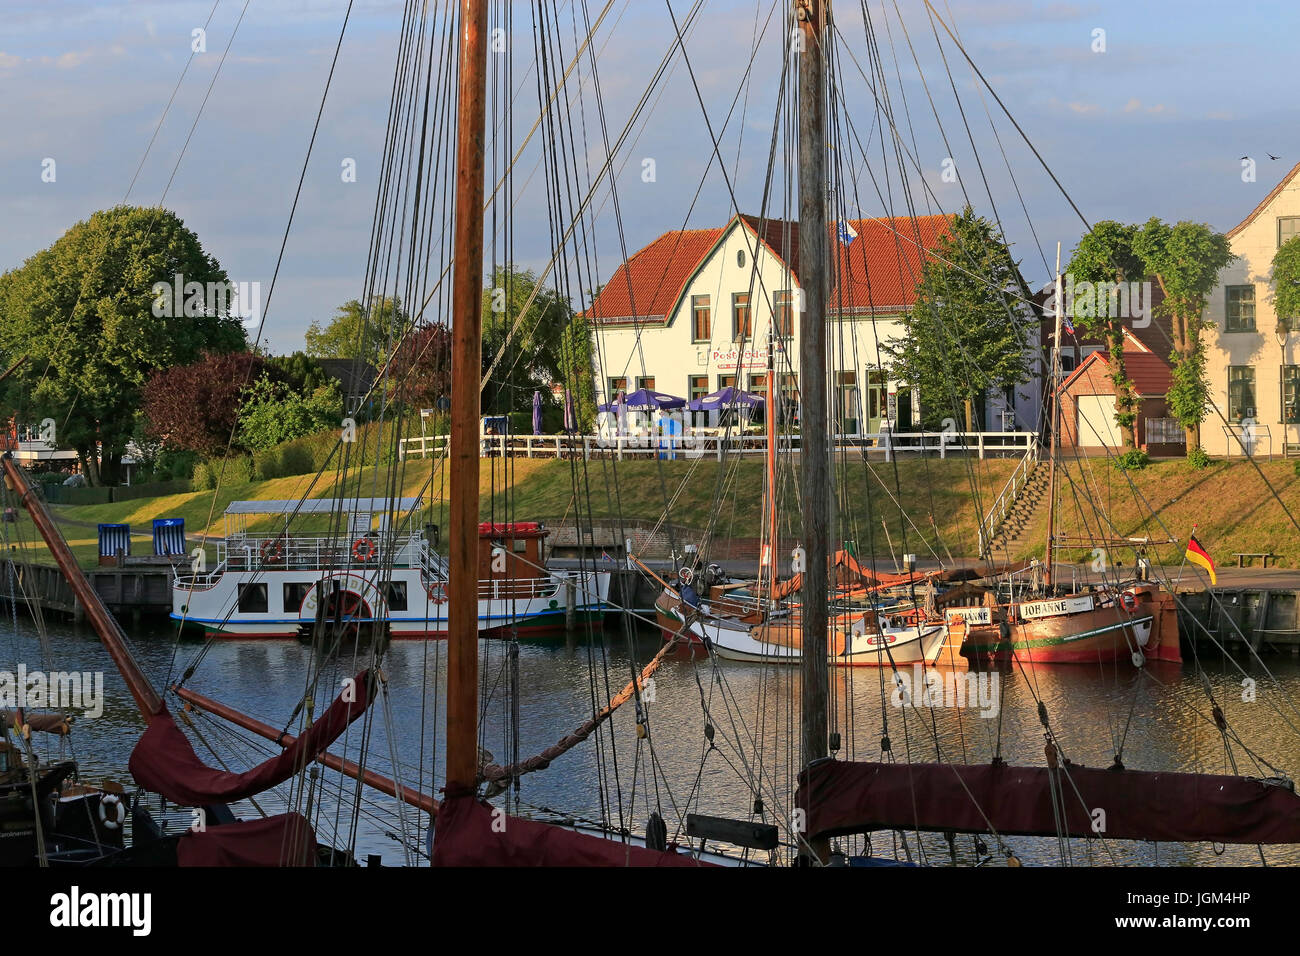 Europe, the Federal Republic of Germany, Lower Saxony, East Friesland, Carolinensiel, harbour, museum harbour, boat, boats, ships, sailing ships, McPB Stock Photo